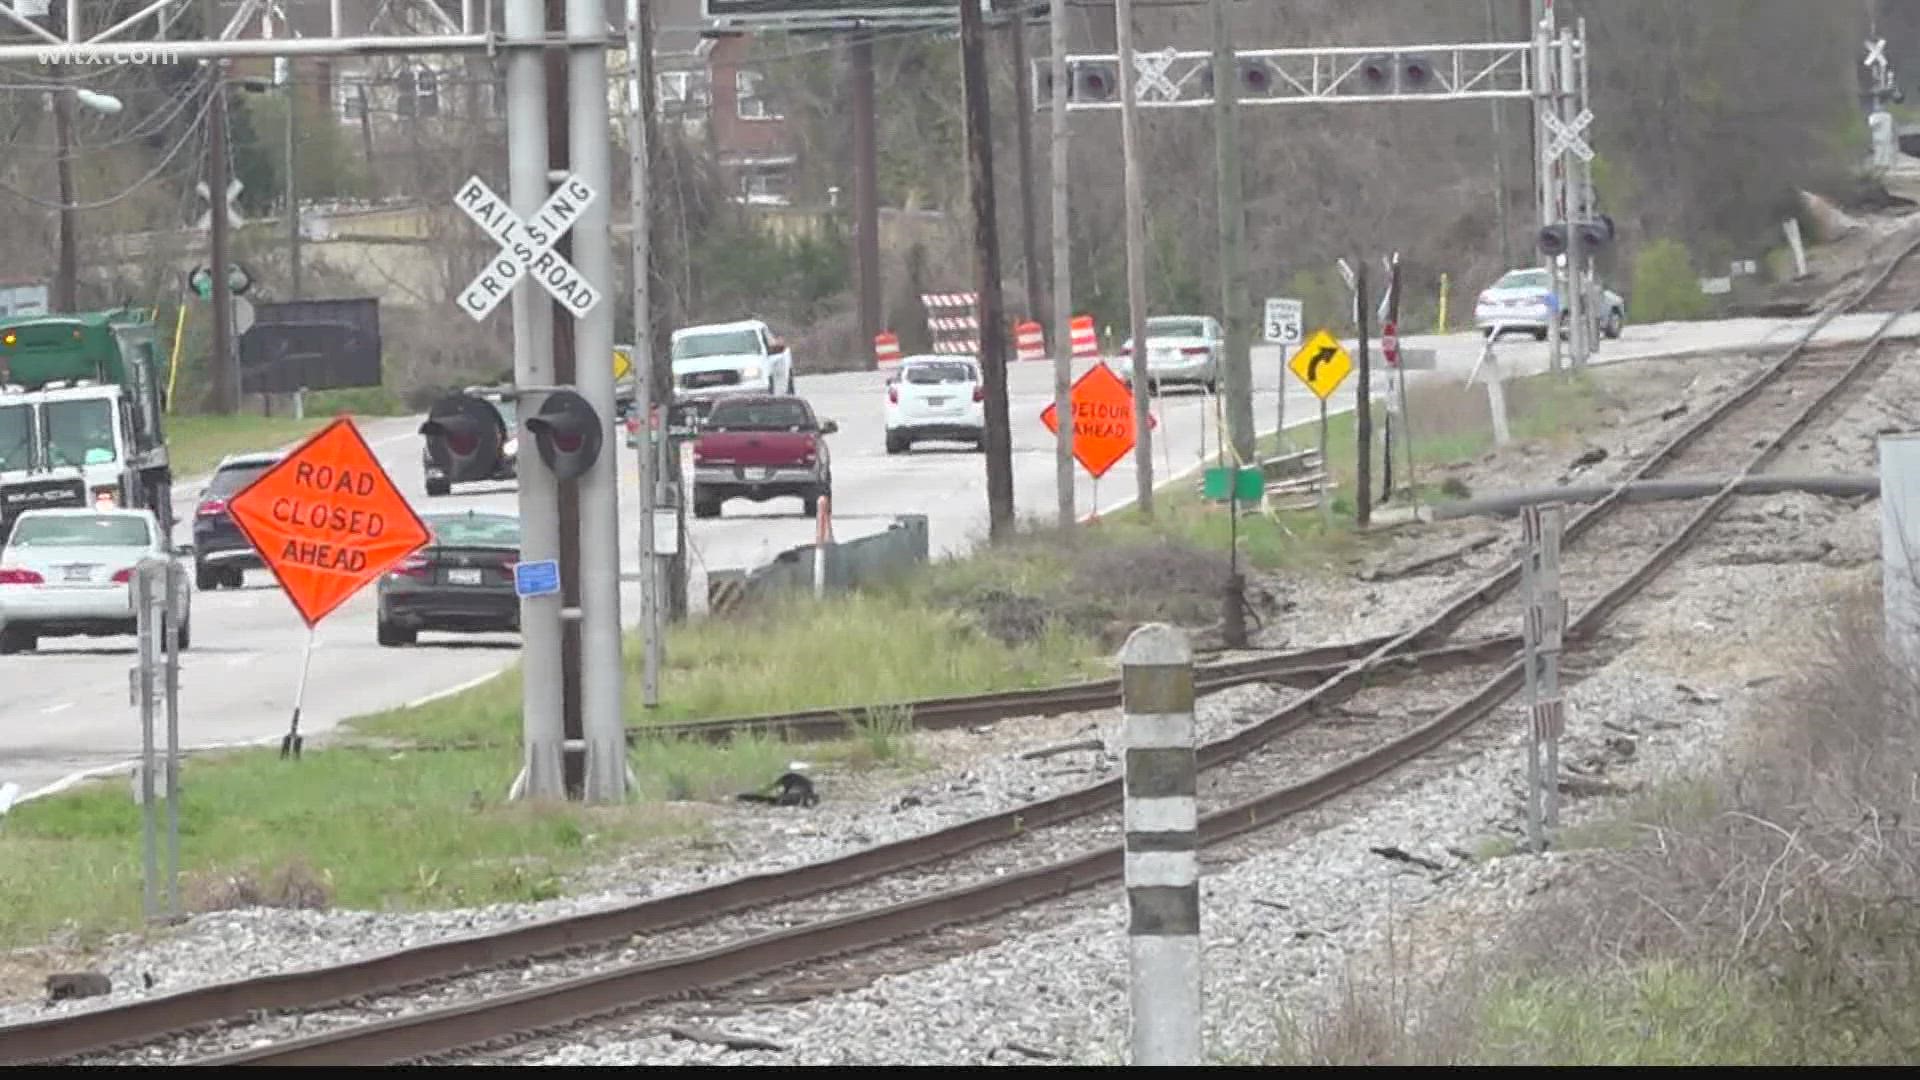 State and local politicians are working together to fund a project that would eliminate rr crossings in Columbia.